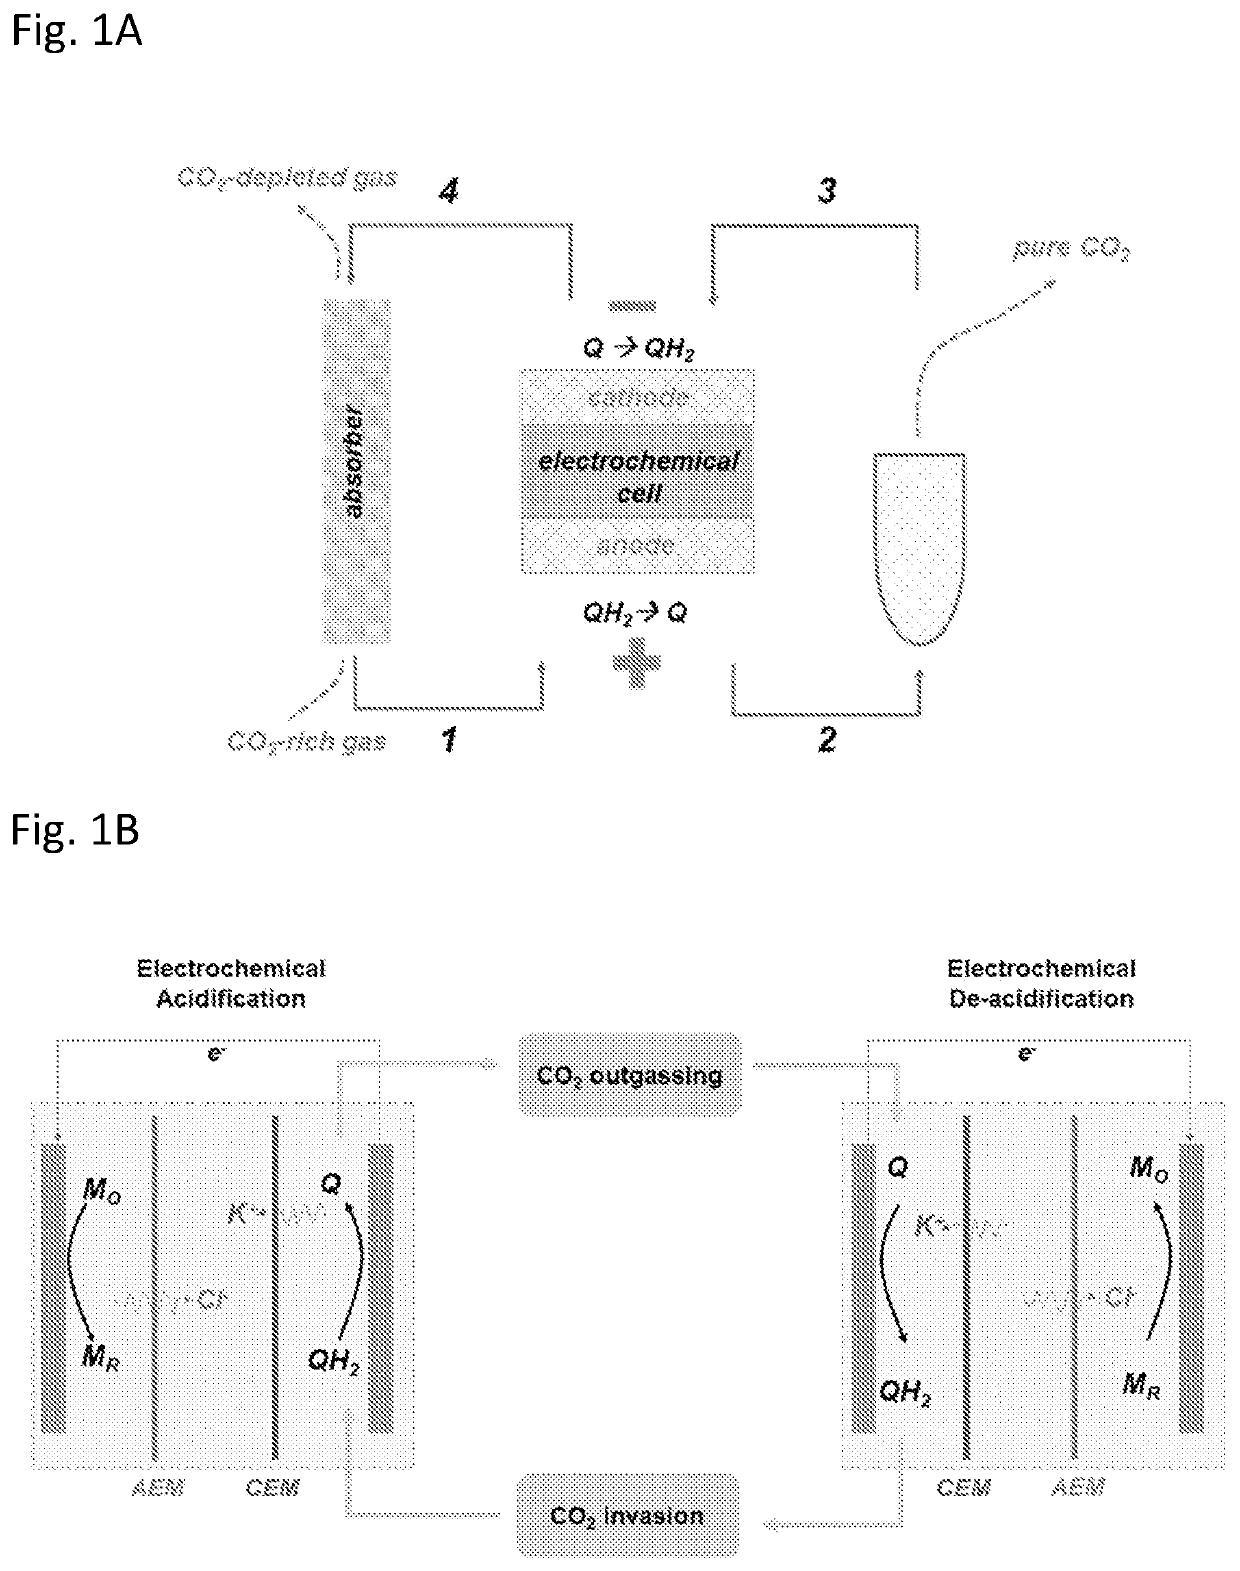 Proton coupled electrochemical co2 capture system